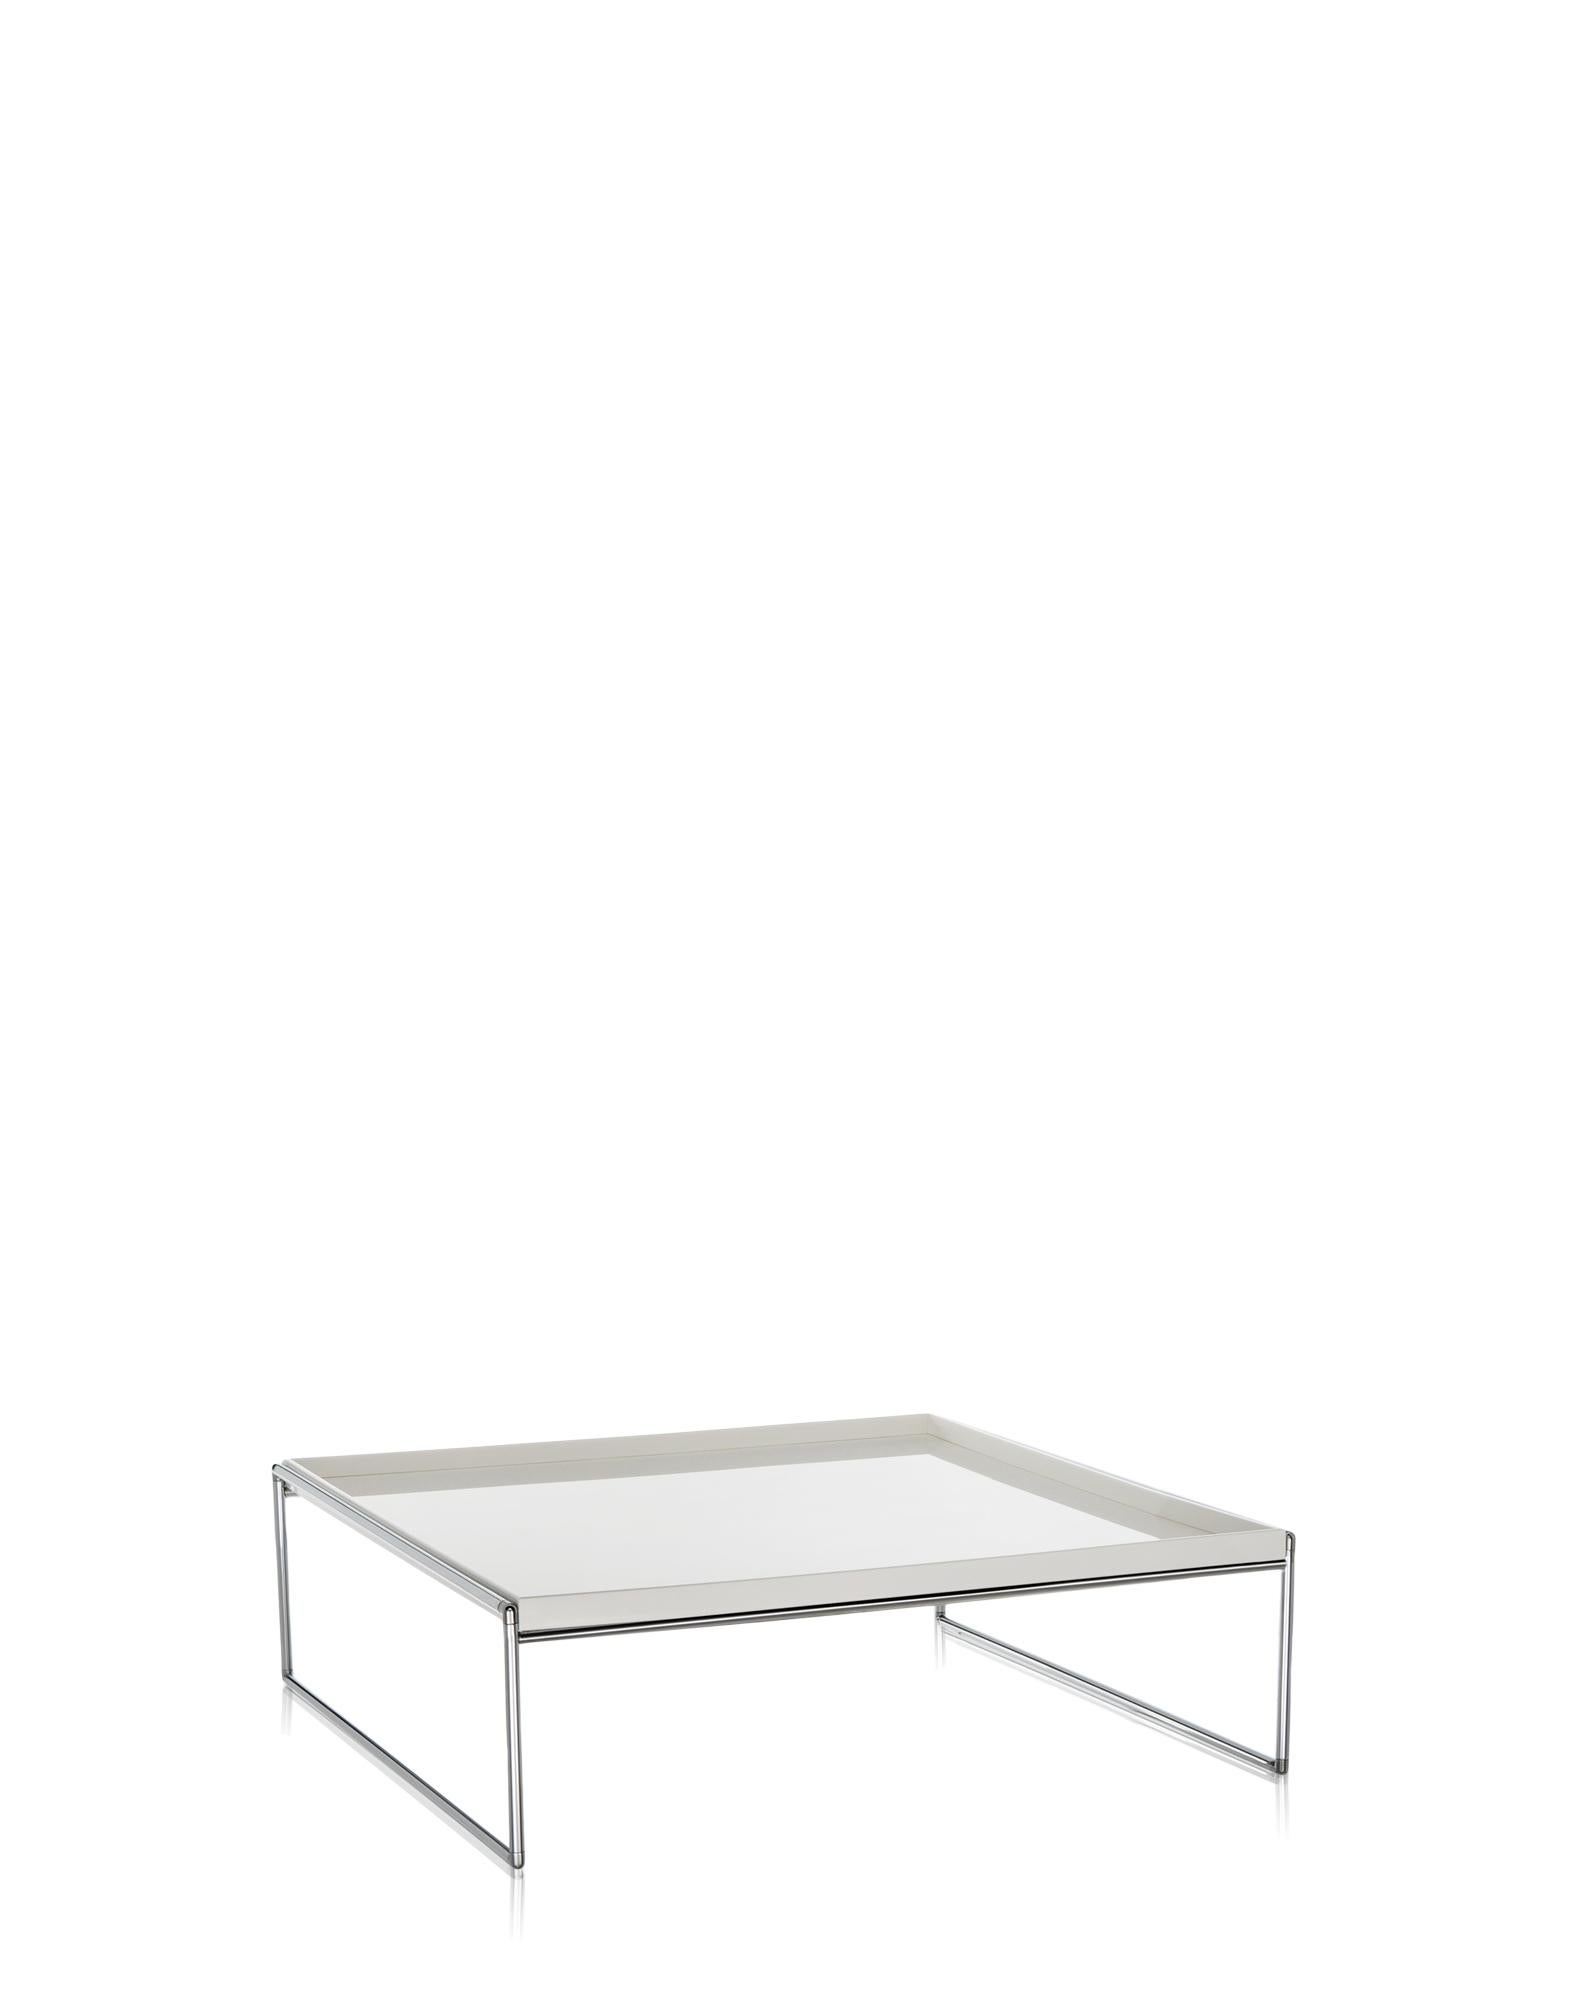 This is an articulated system of table surfaces for the home or office. The construction concept of the design is based on small tables and shelf systems, with patterns and finishes which resemble lacquered Japanese trays.

Available in white and